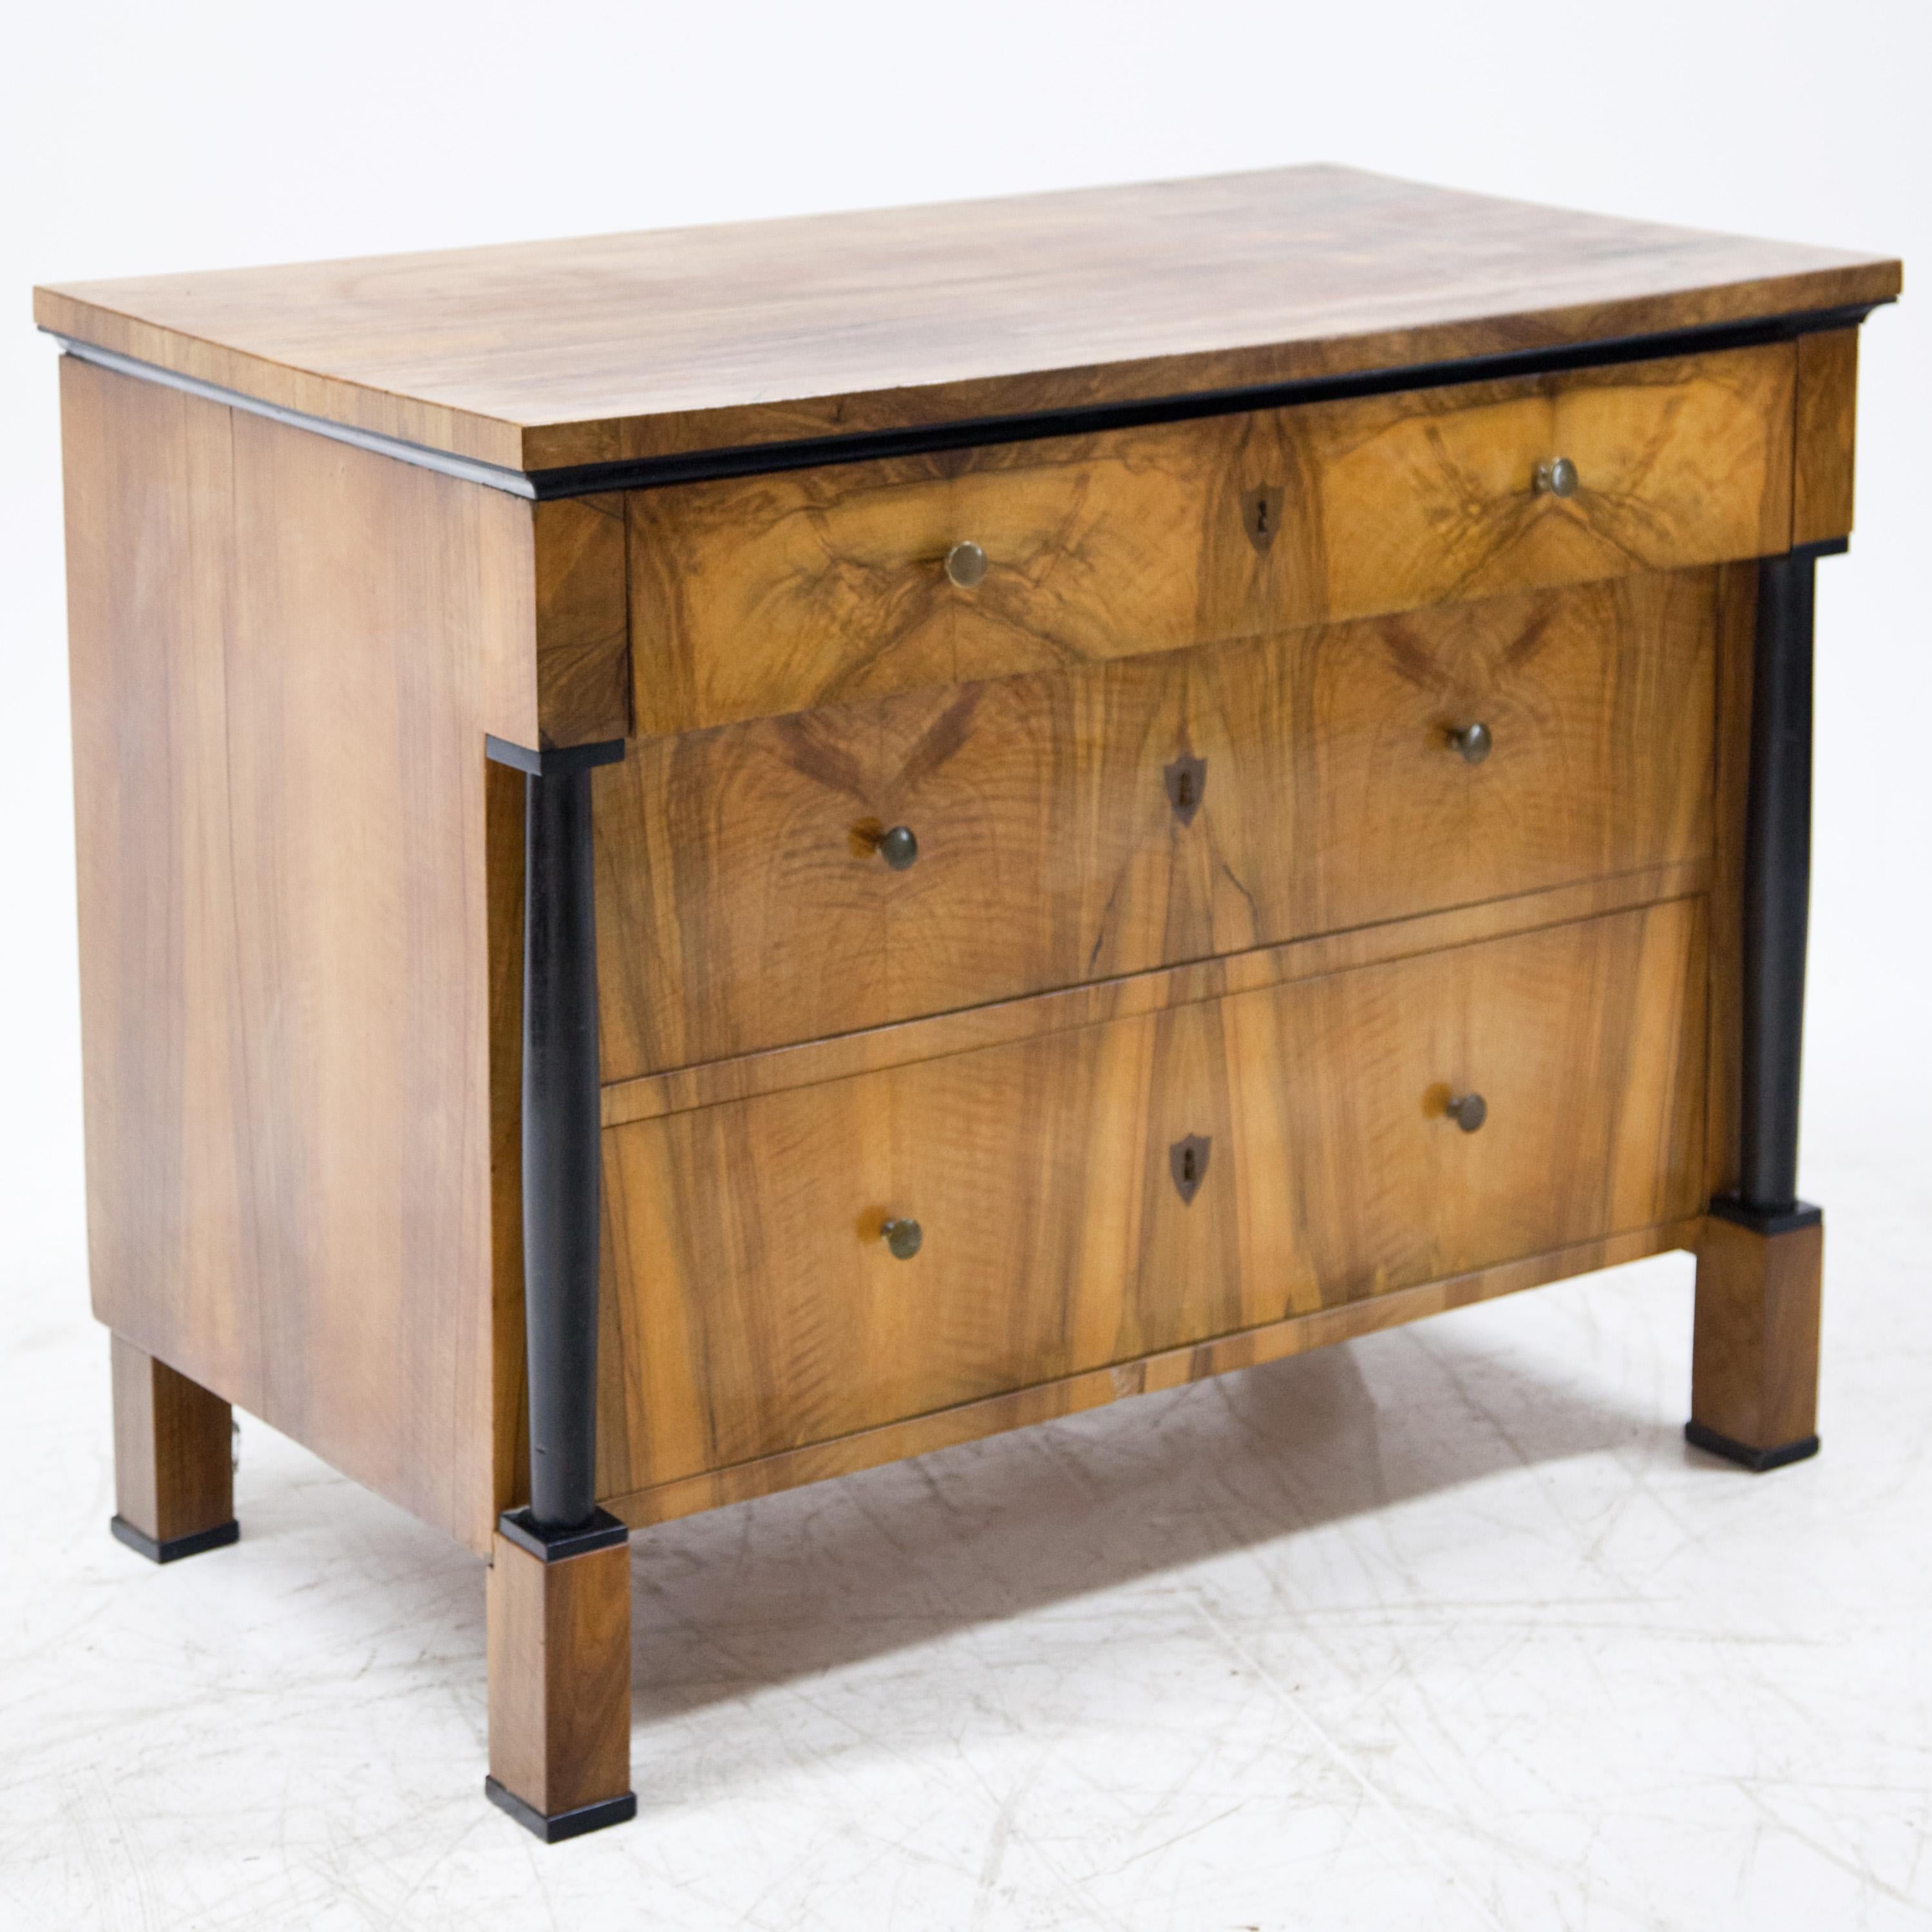 Three-drawer Biedermeier chest of drawers on square feet veneered in walnut. The head drawer protrudes slightly and rests on ebonised full columns.